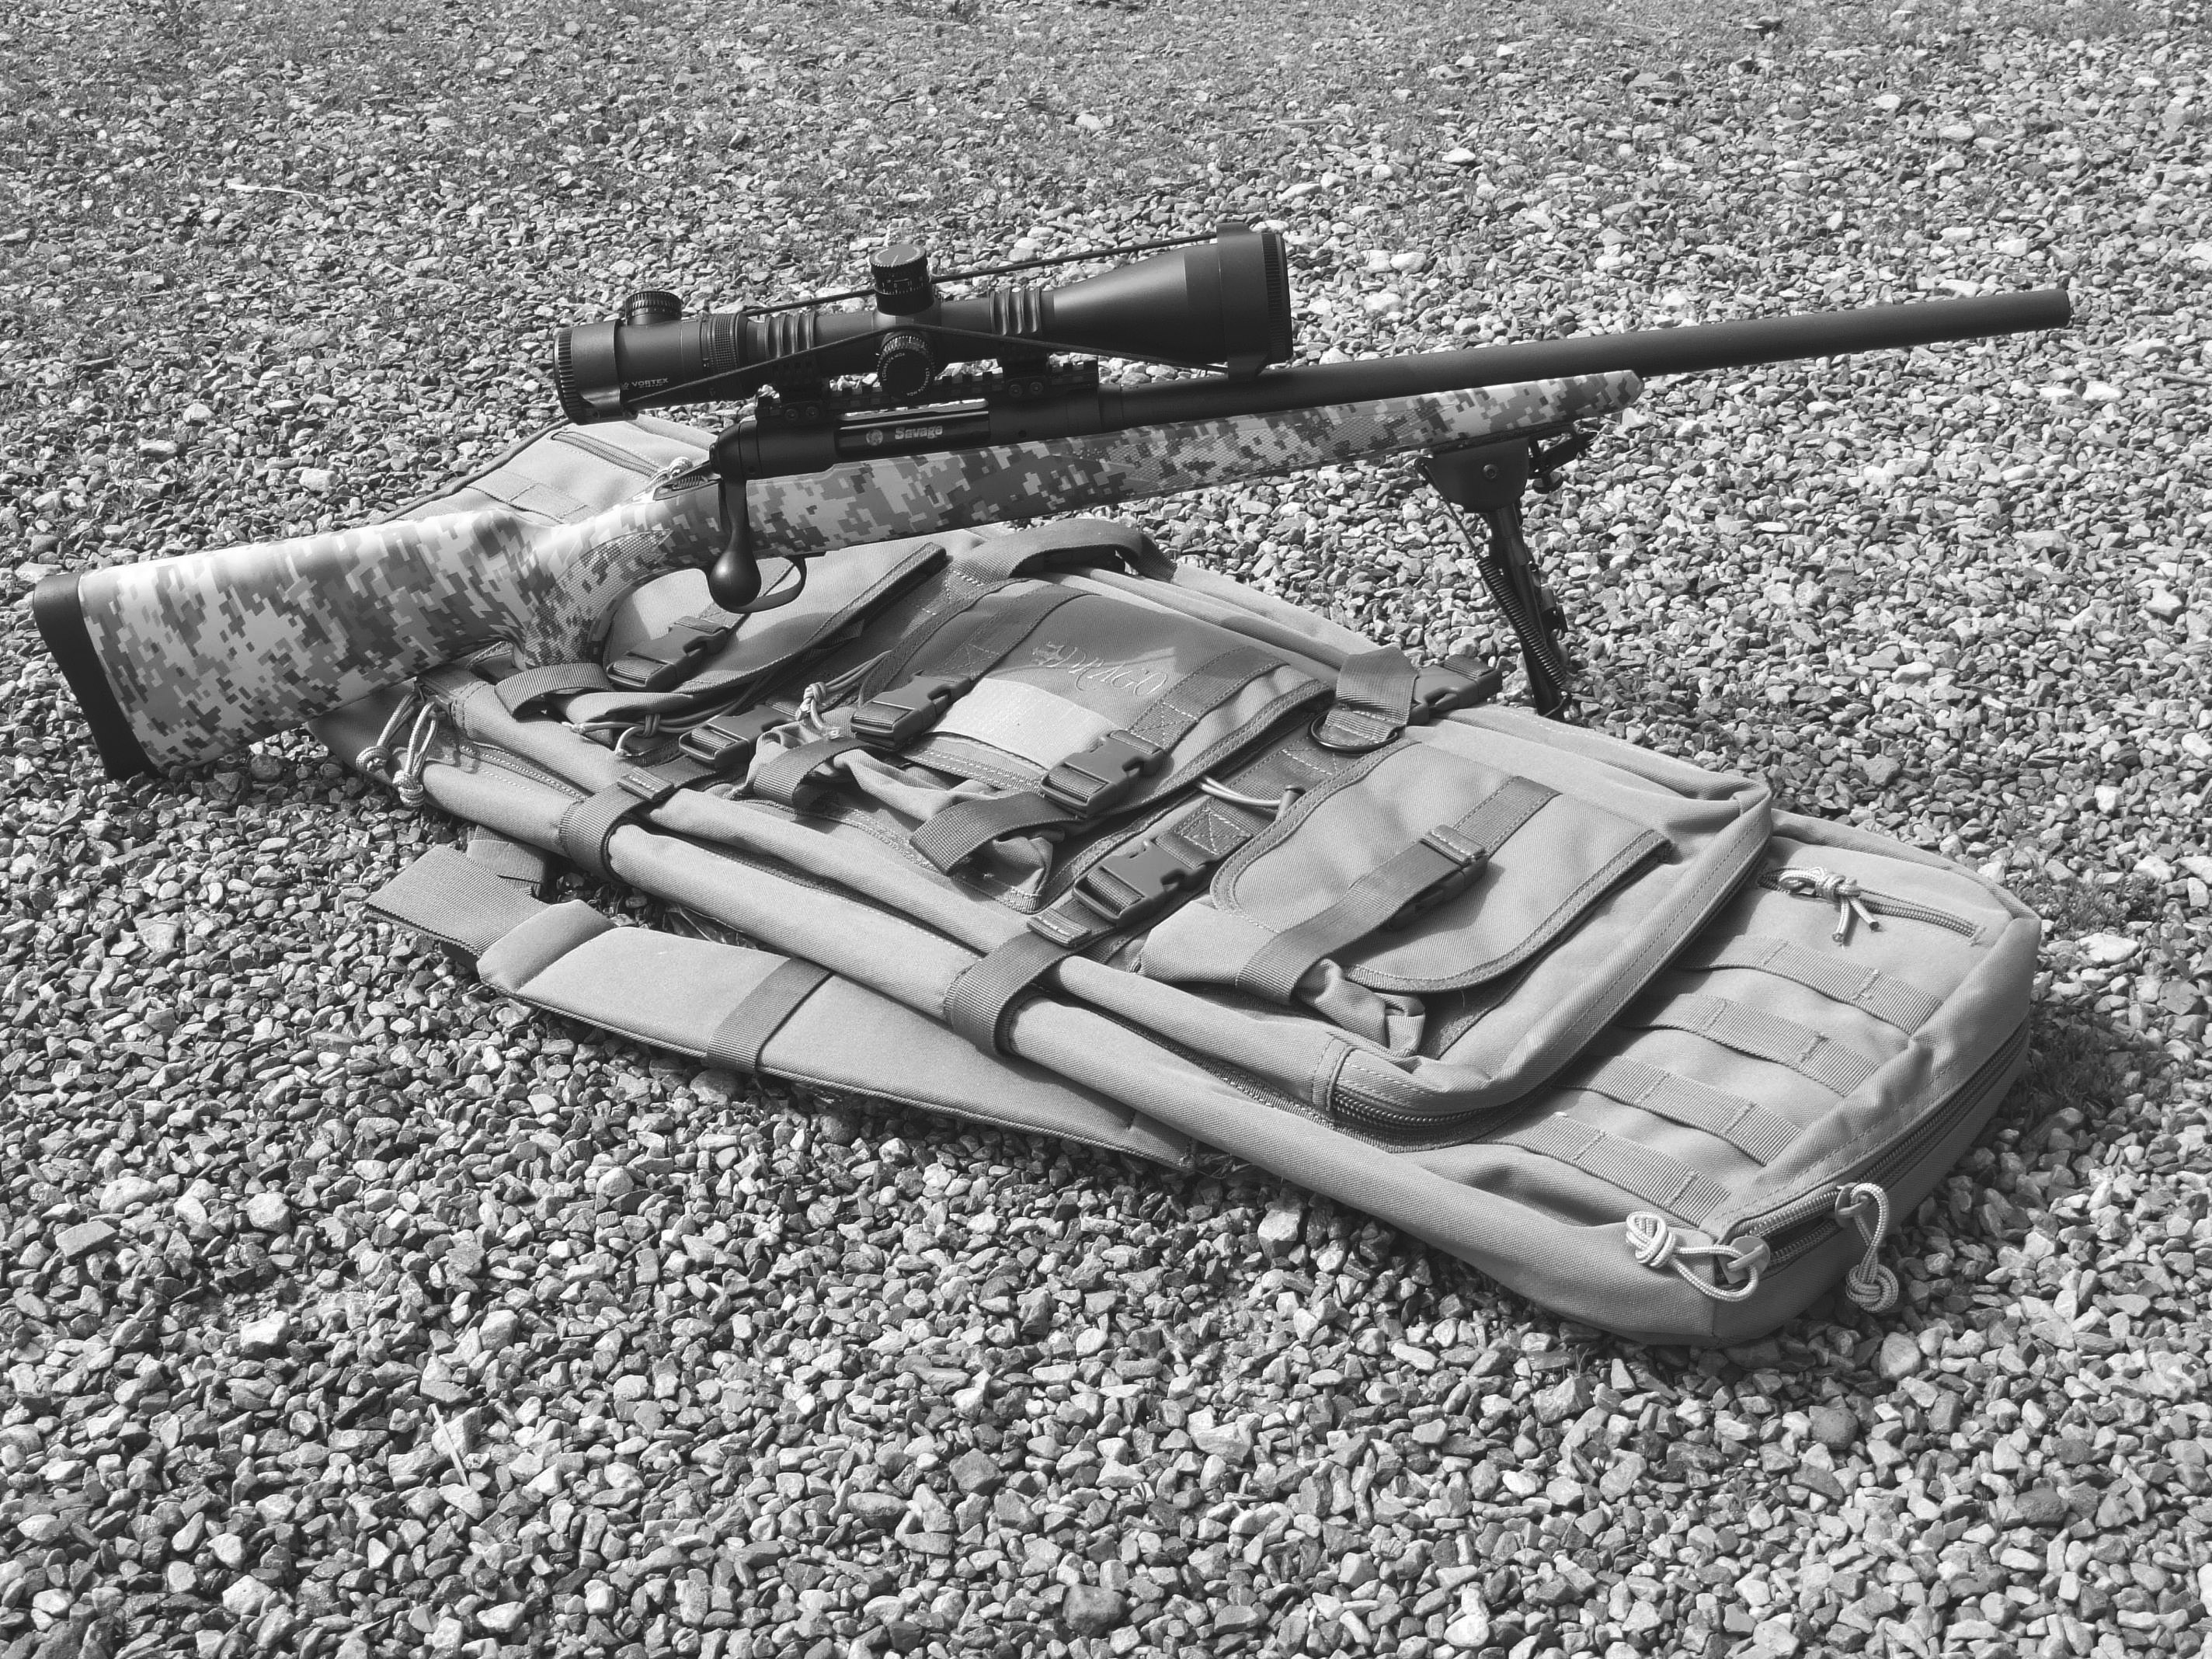 The Savage 110 Tactical .308 Carbine is a five-shot bolt gun that would do for long-range defense, though it is limited in capacity and speed. Factory equipped with an Army Digital Camo stock, the Carbine is shown with a Vortex scope and bipod. The tactical carbine is lighter than many sniper rifles currently available.